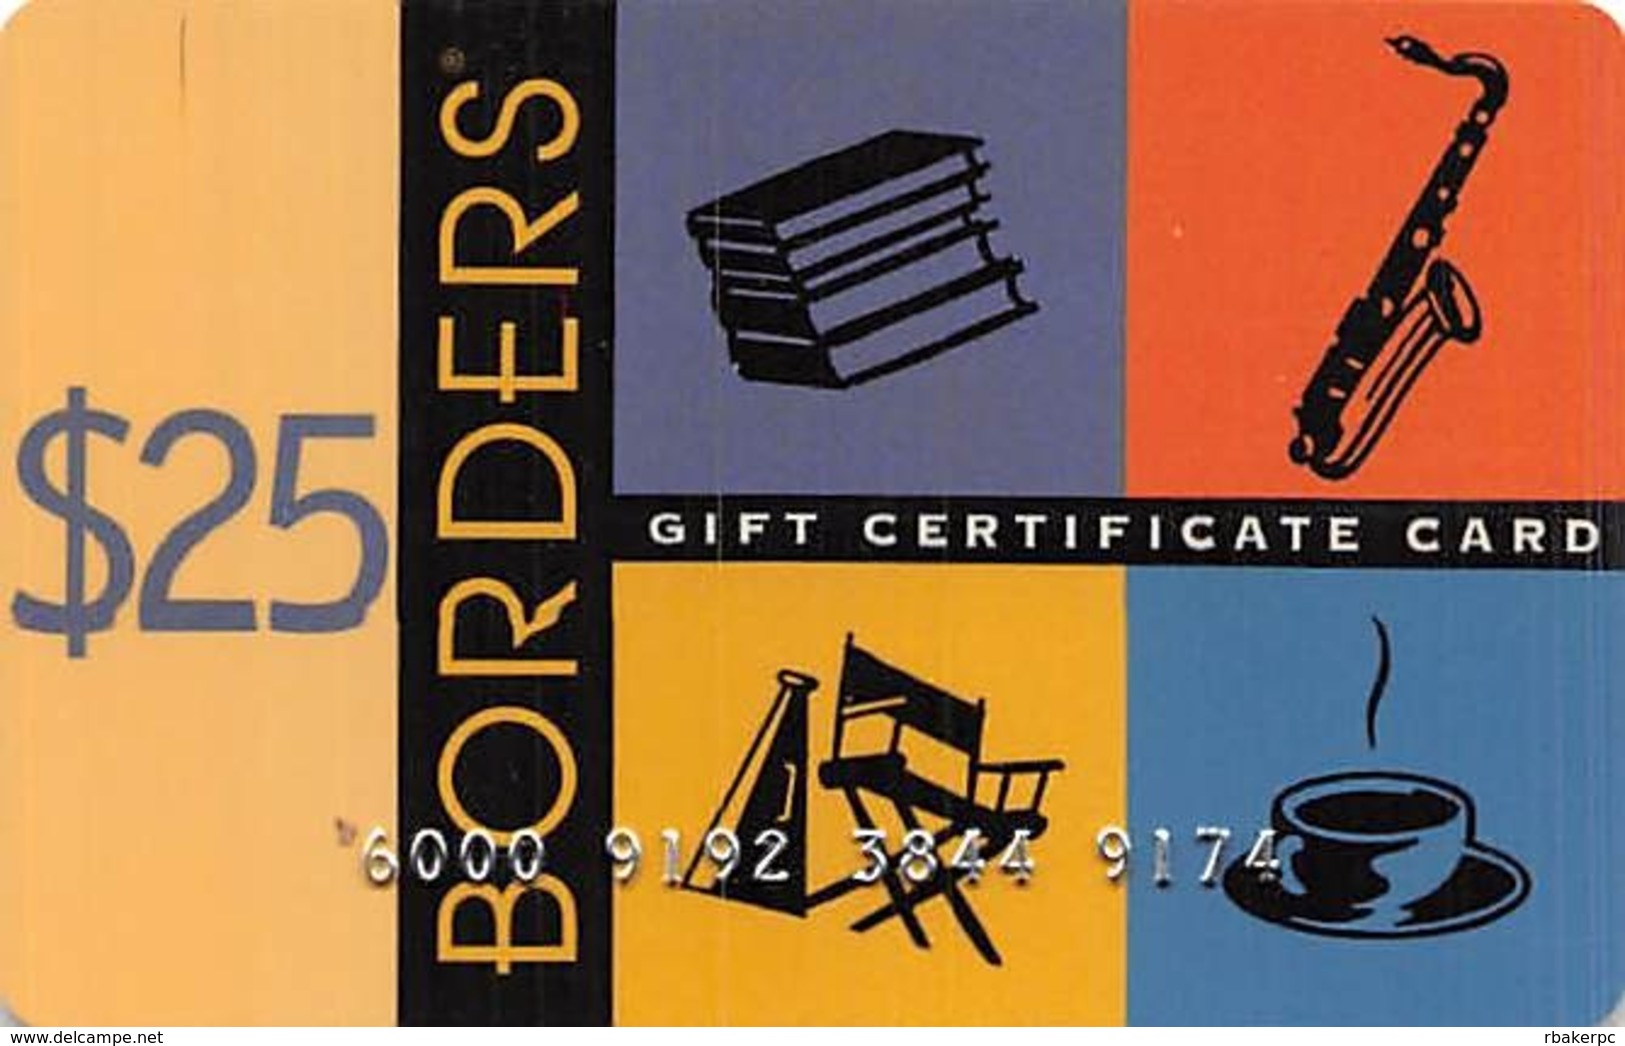 Borders Gift Card - Gift Cards